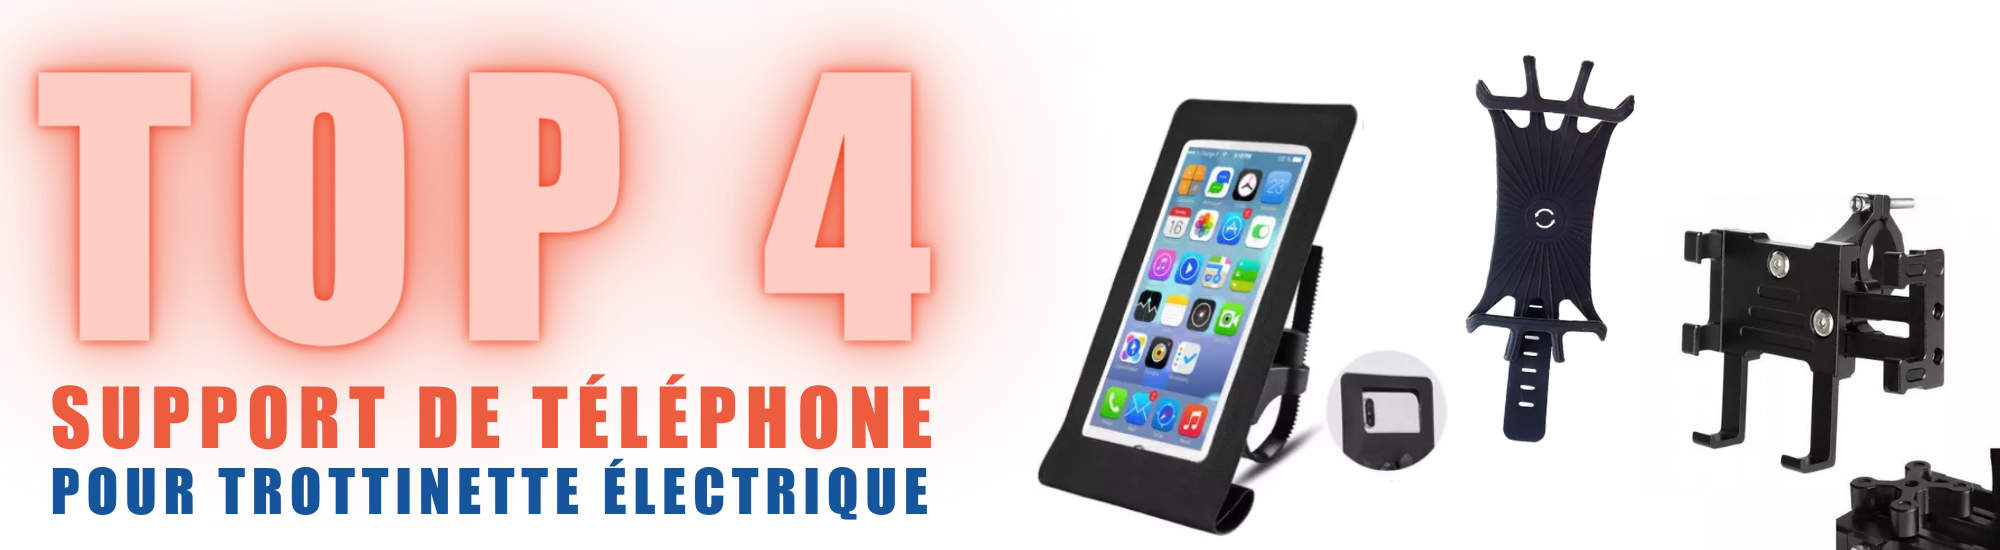 top 4 support telephone mobilityurban trottinette electrique